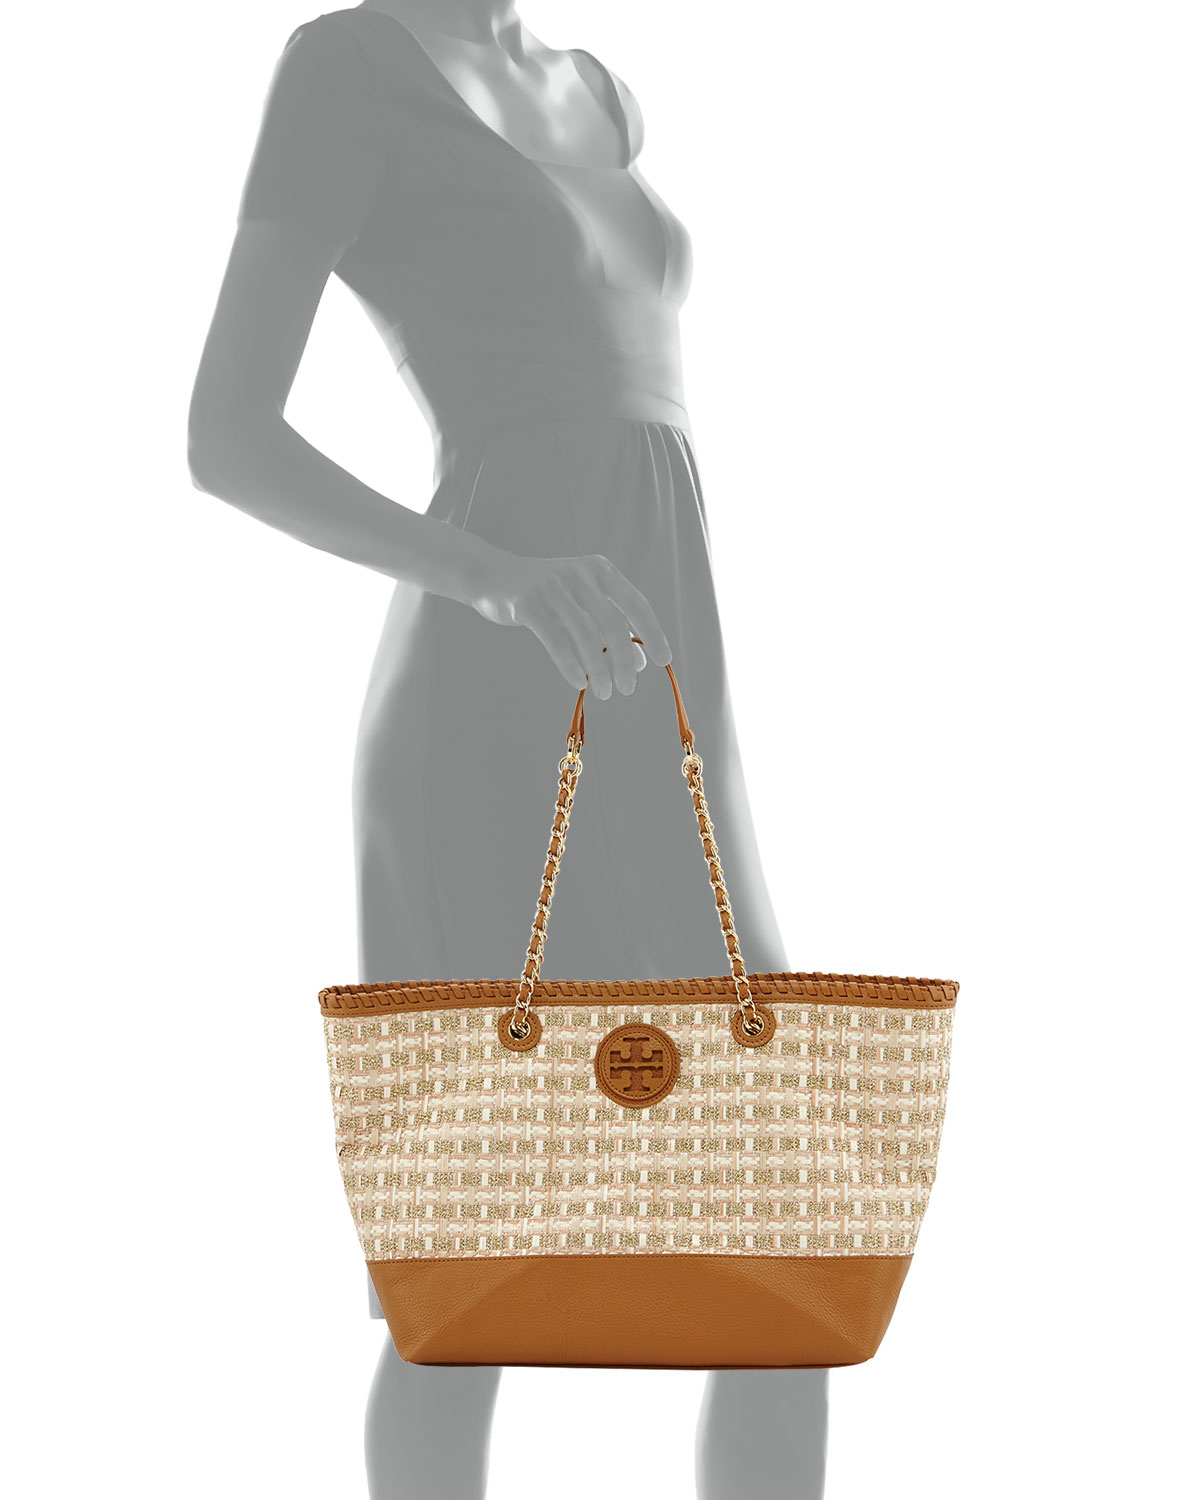 Tory Burch   Beige Marion Woven Straw Tote Bag   Lyst